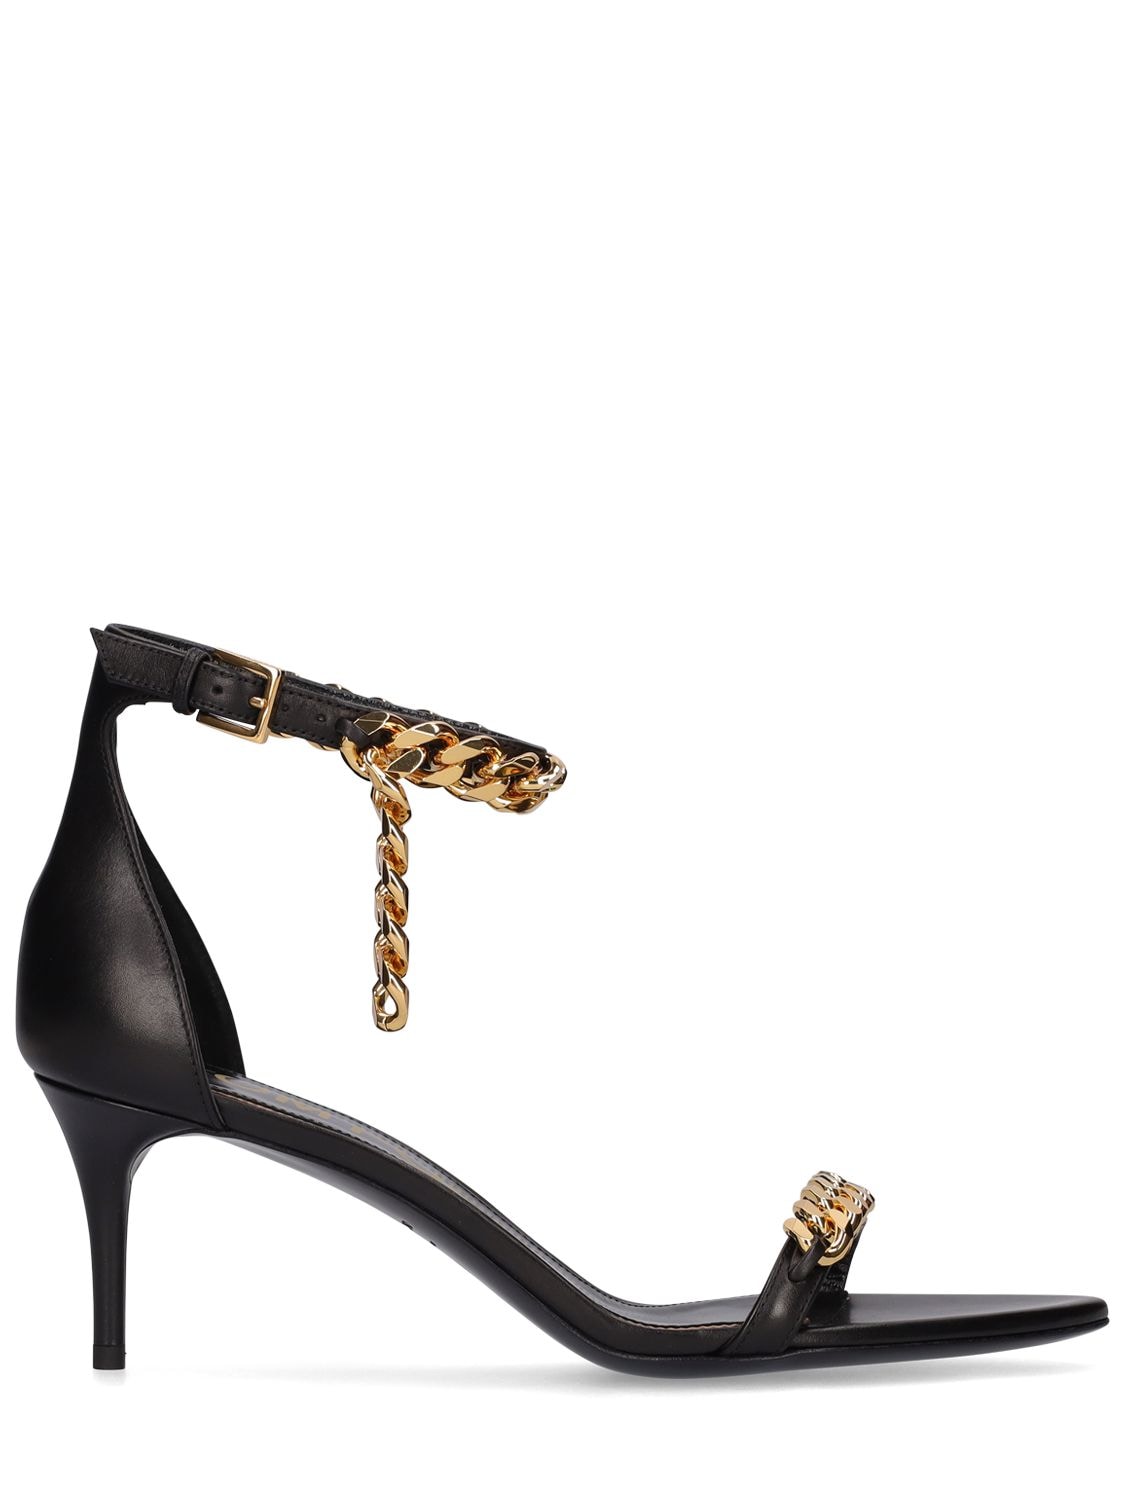 TOM FORD 65MM CHAIN LEATHER SANDALS